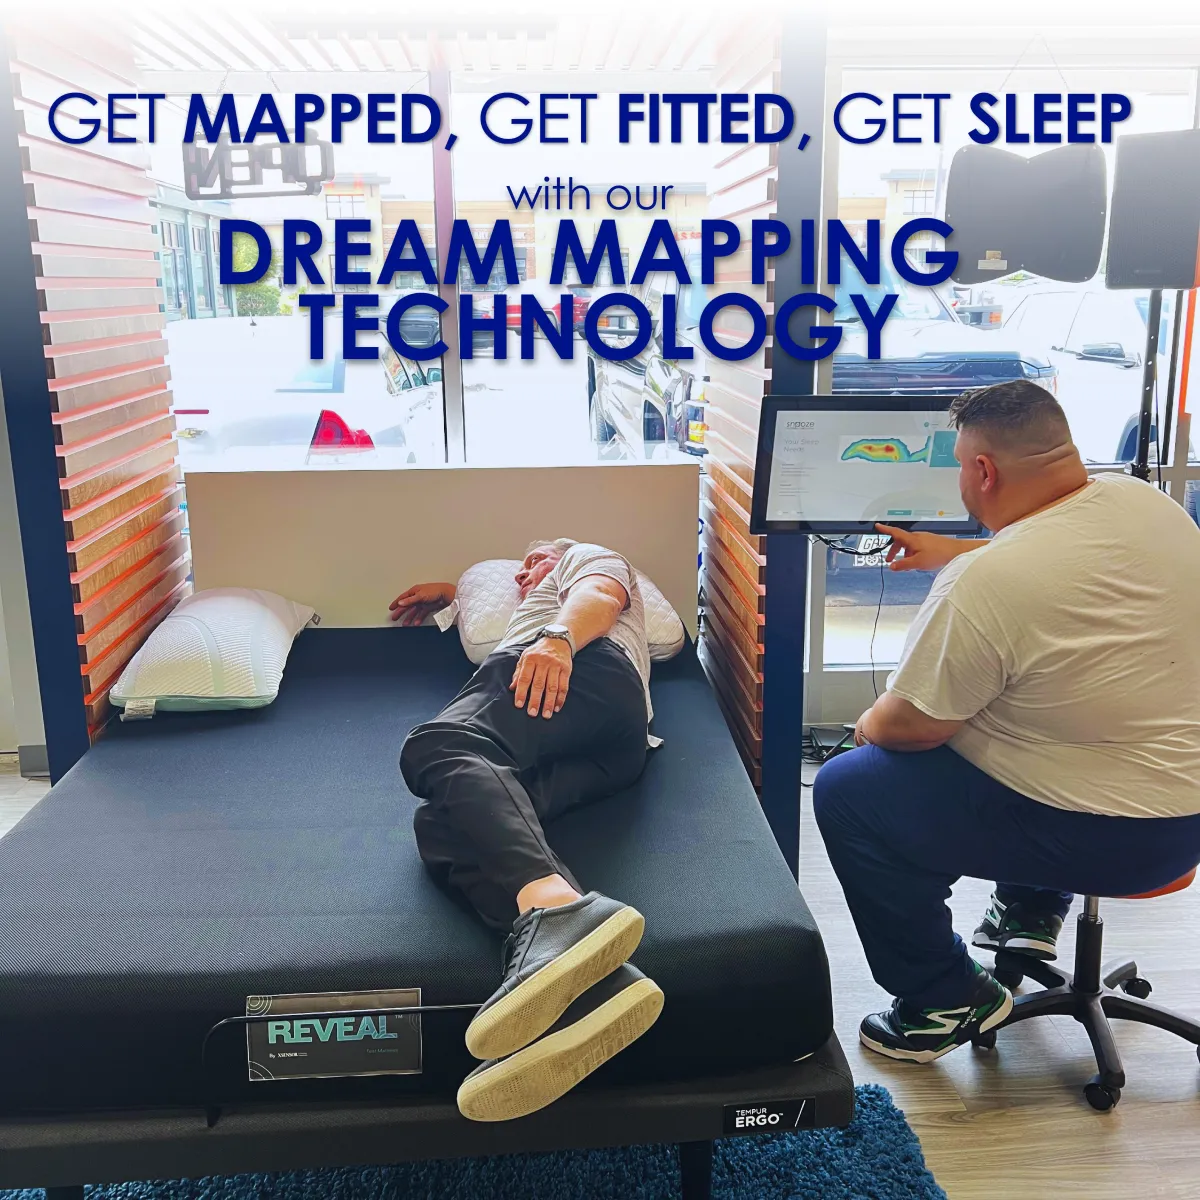 DREAM MAPPING TECHNOLOGY